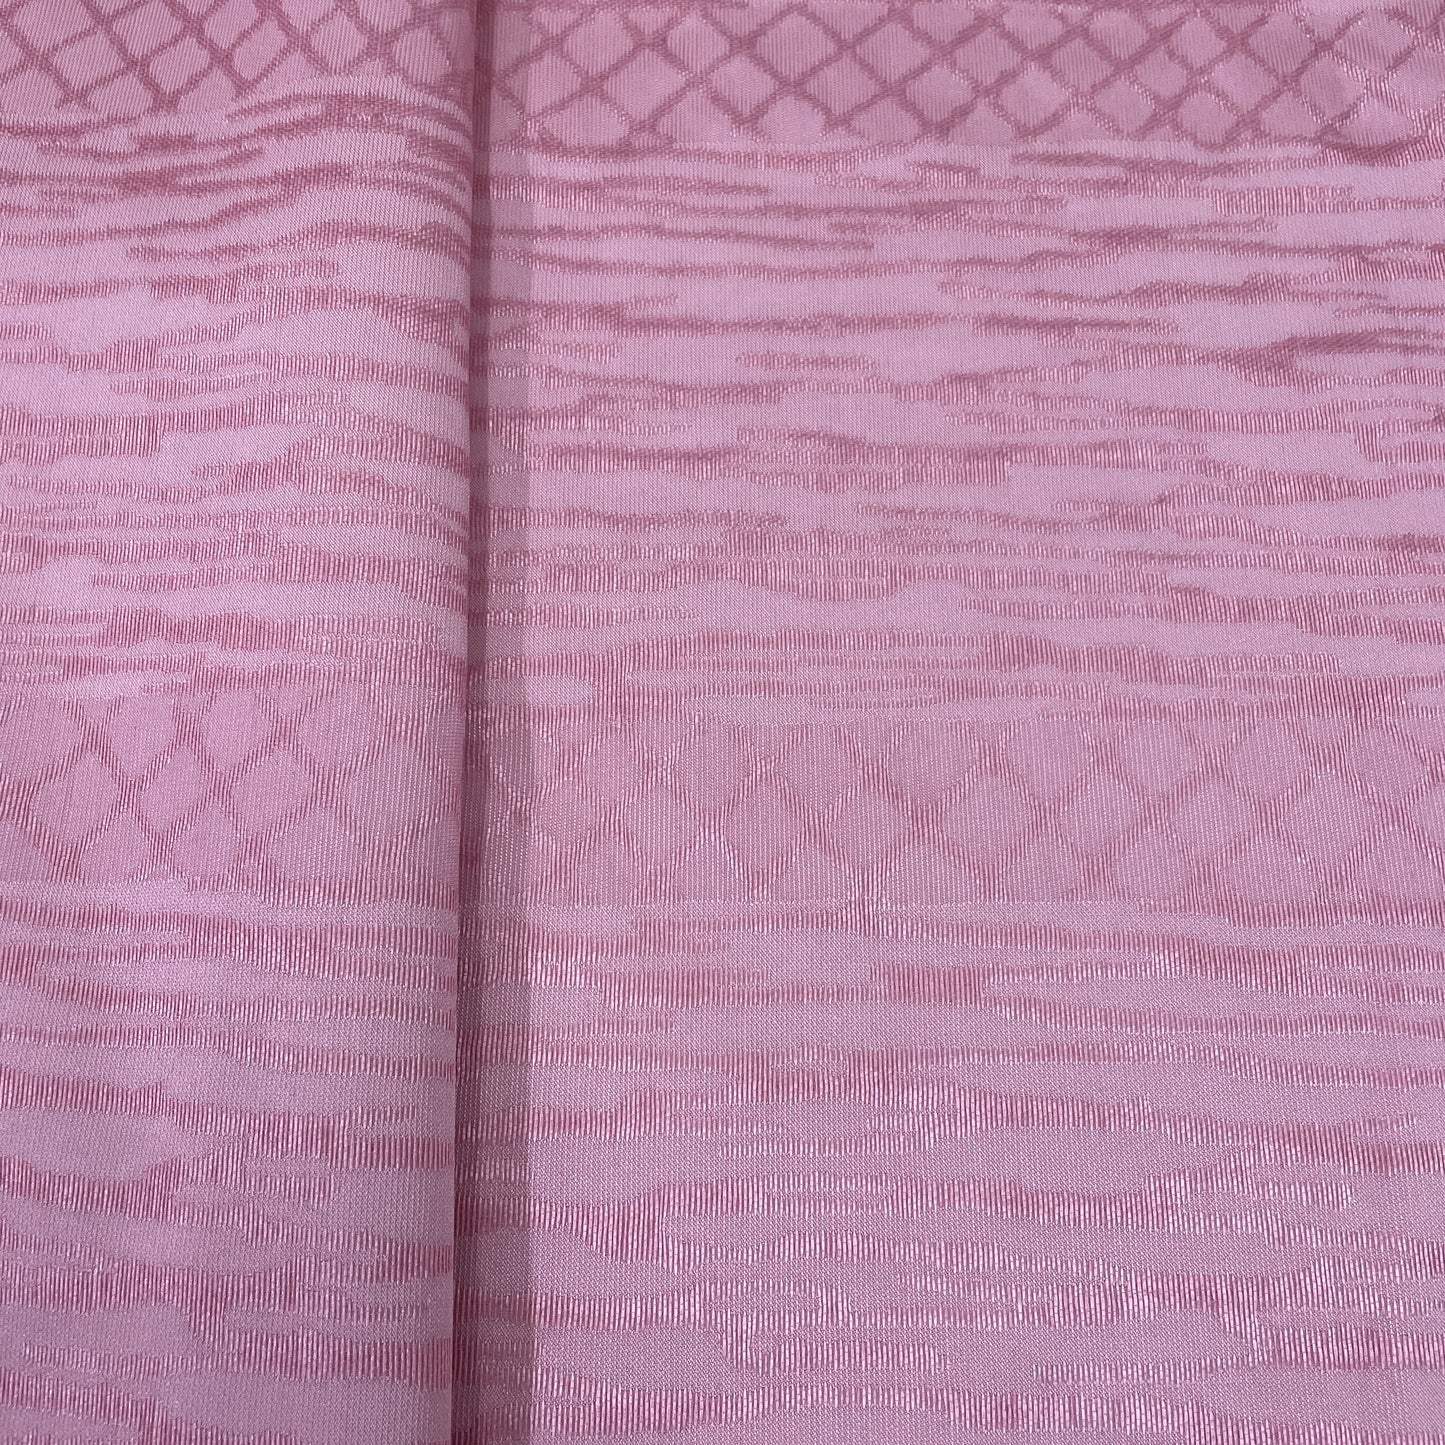 Classic Pink Abstract Weave Knitted Fabric